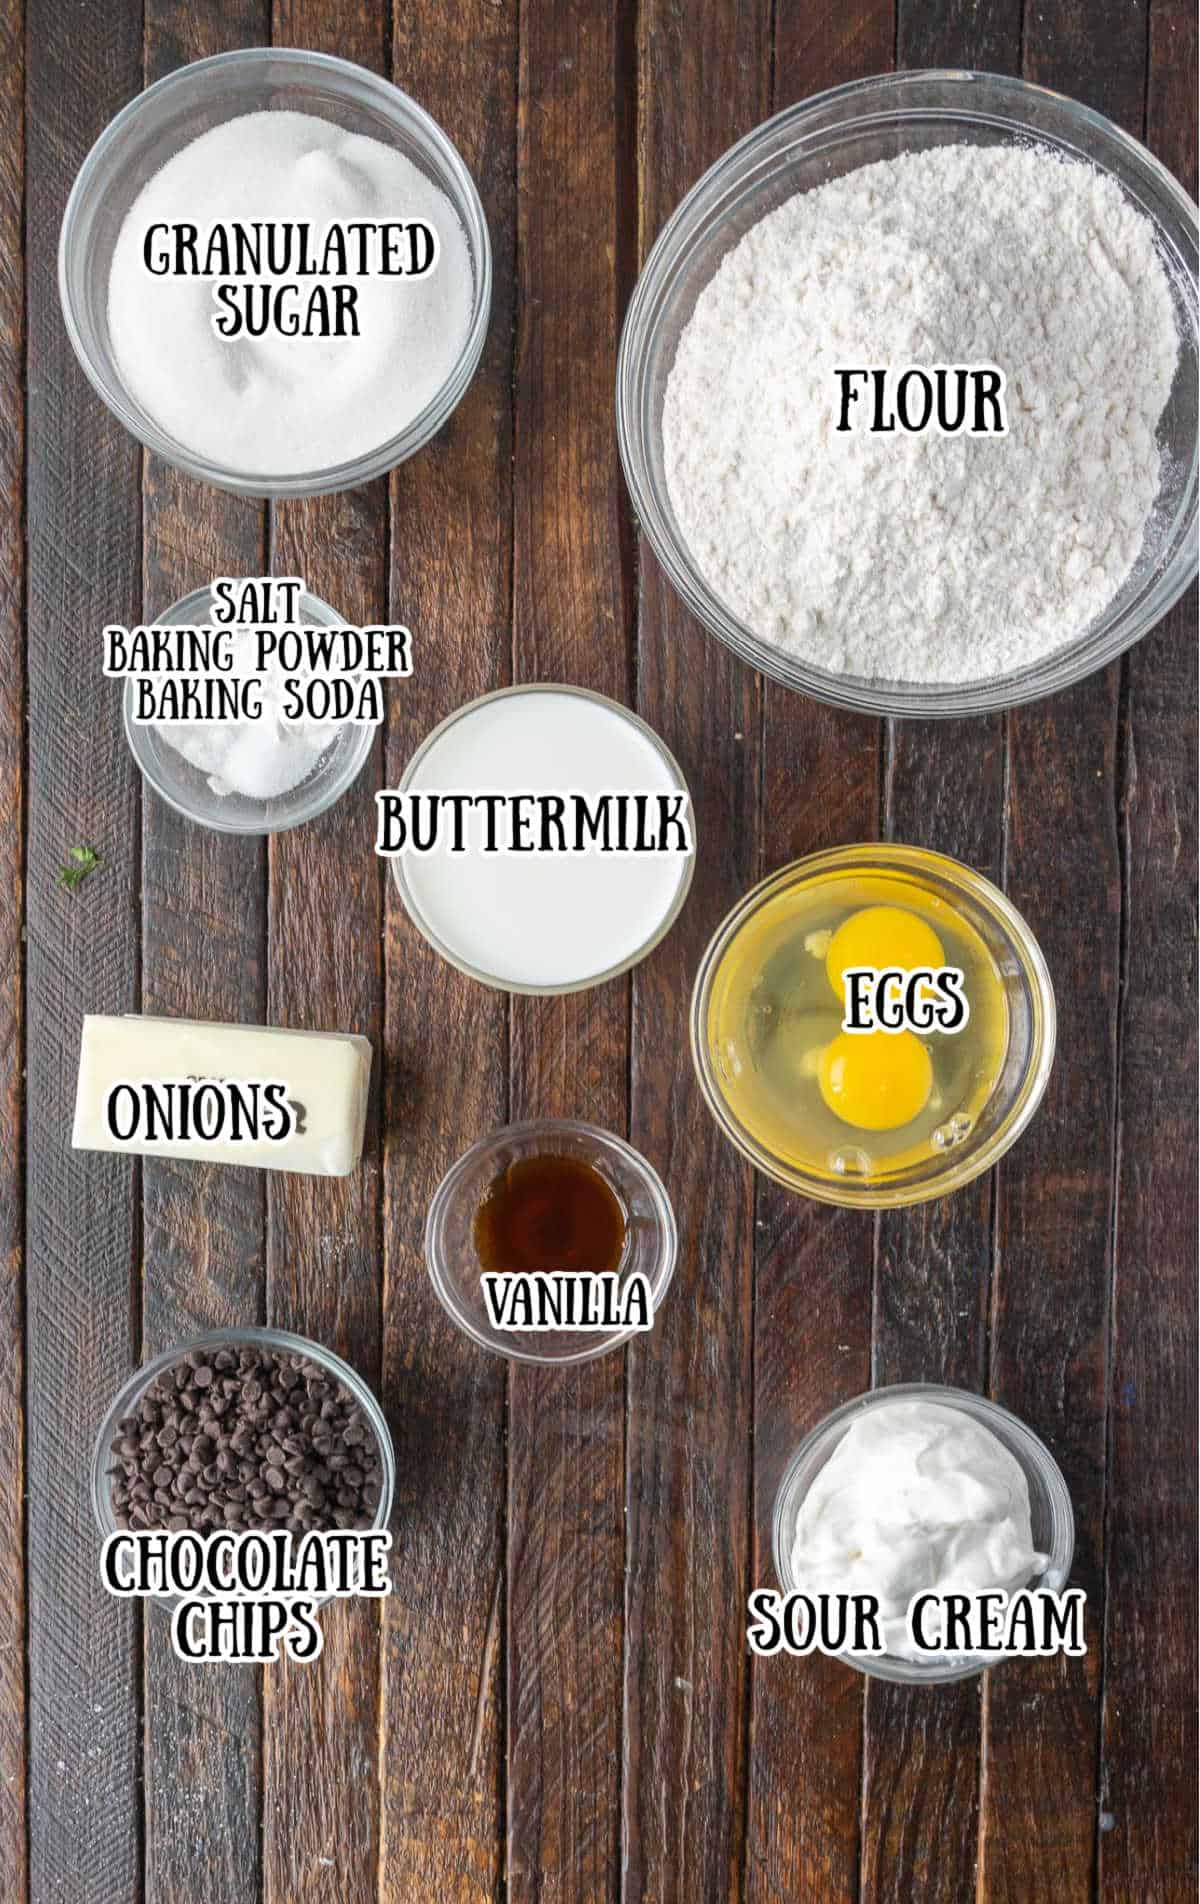 All the ingredients needed for this muffin recipe.